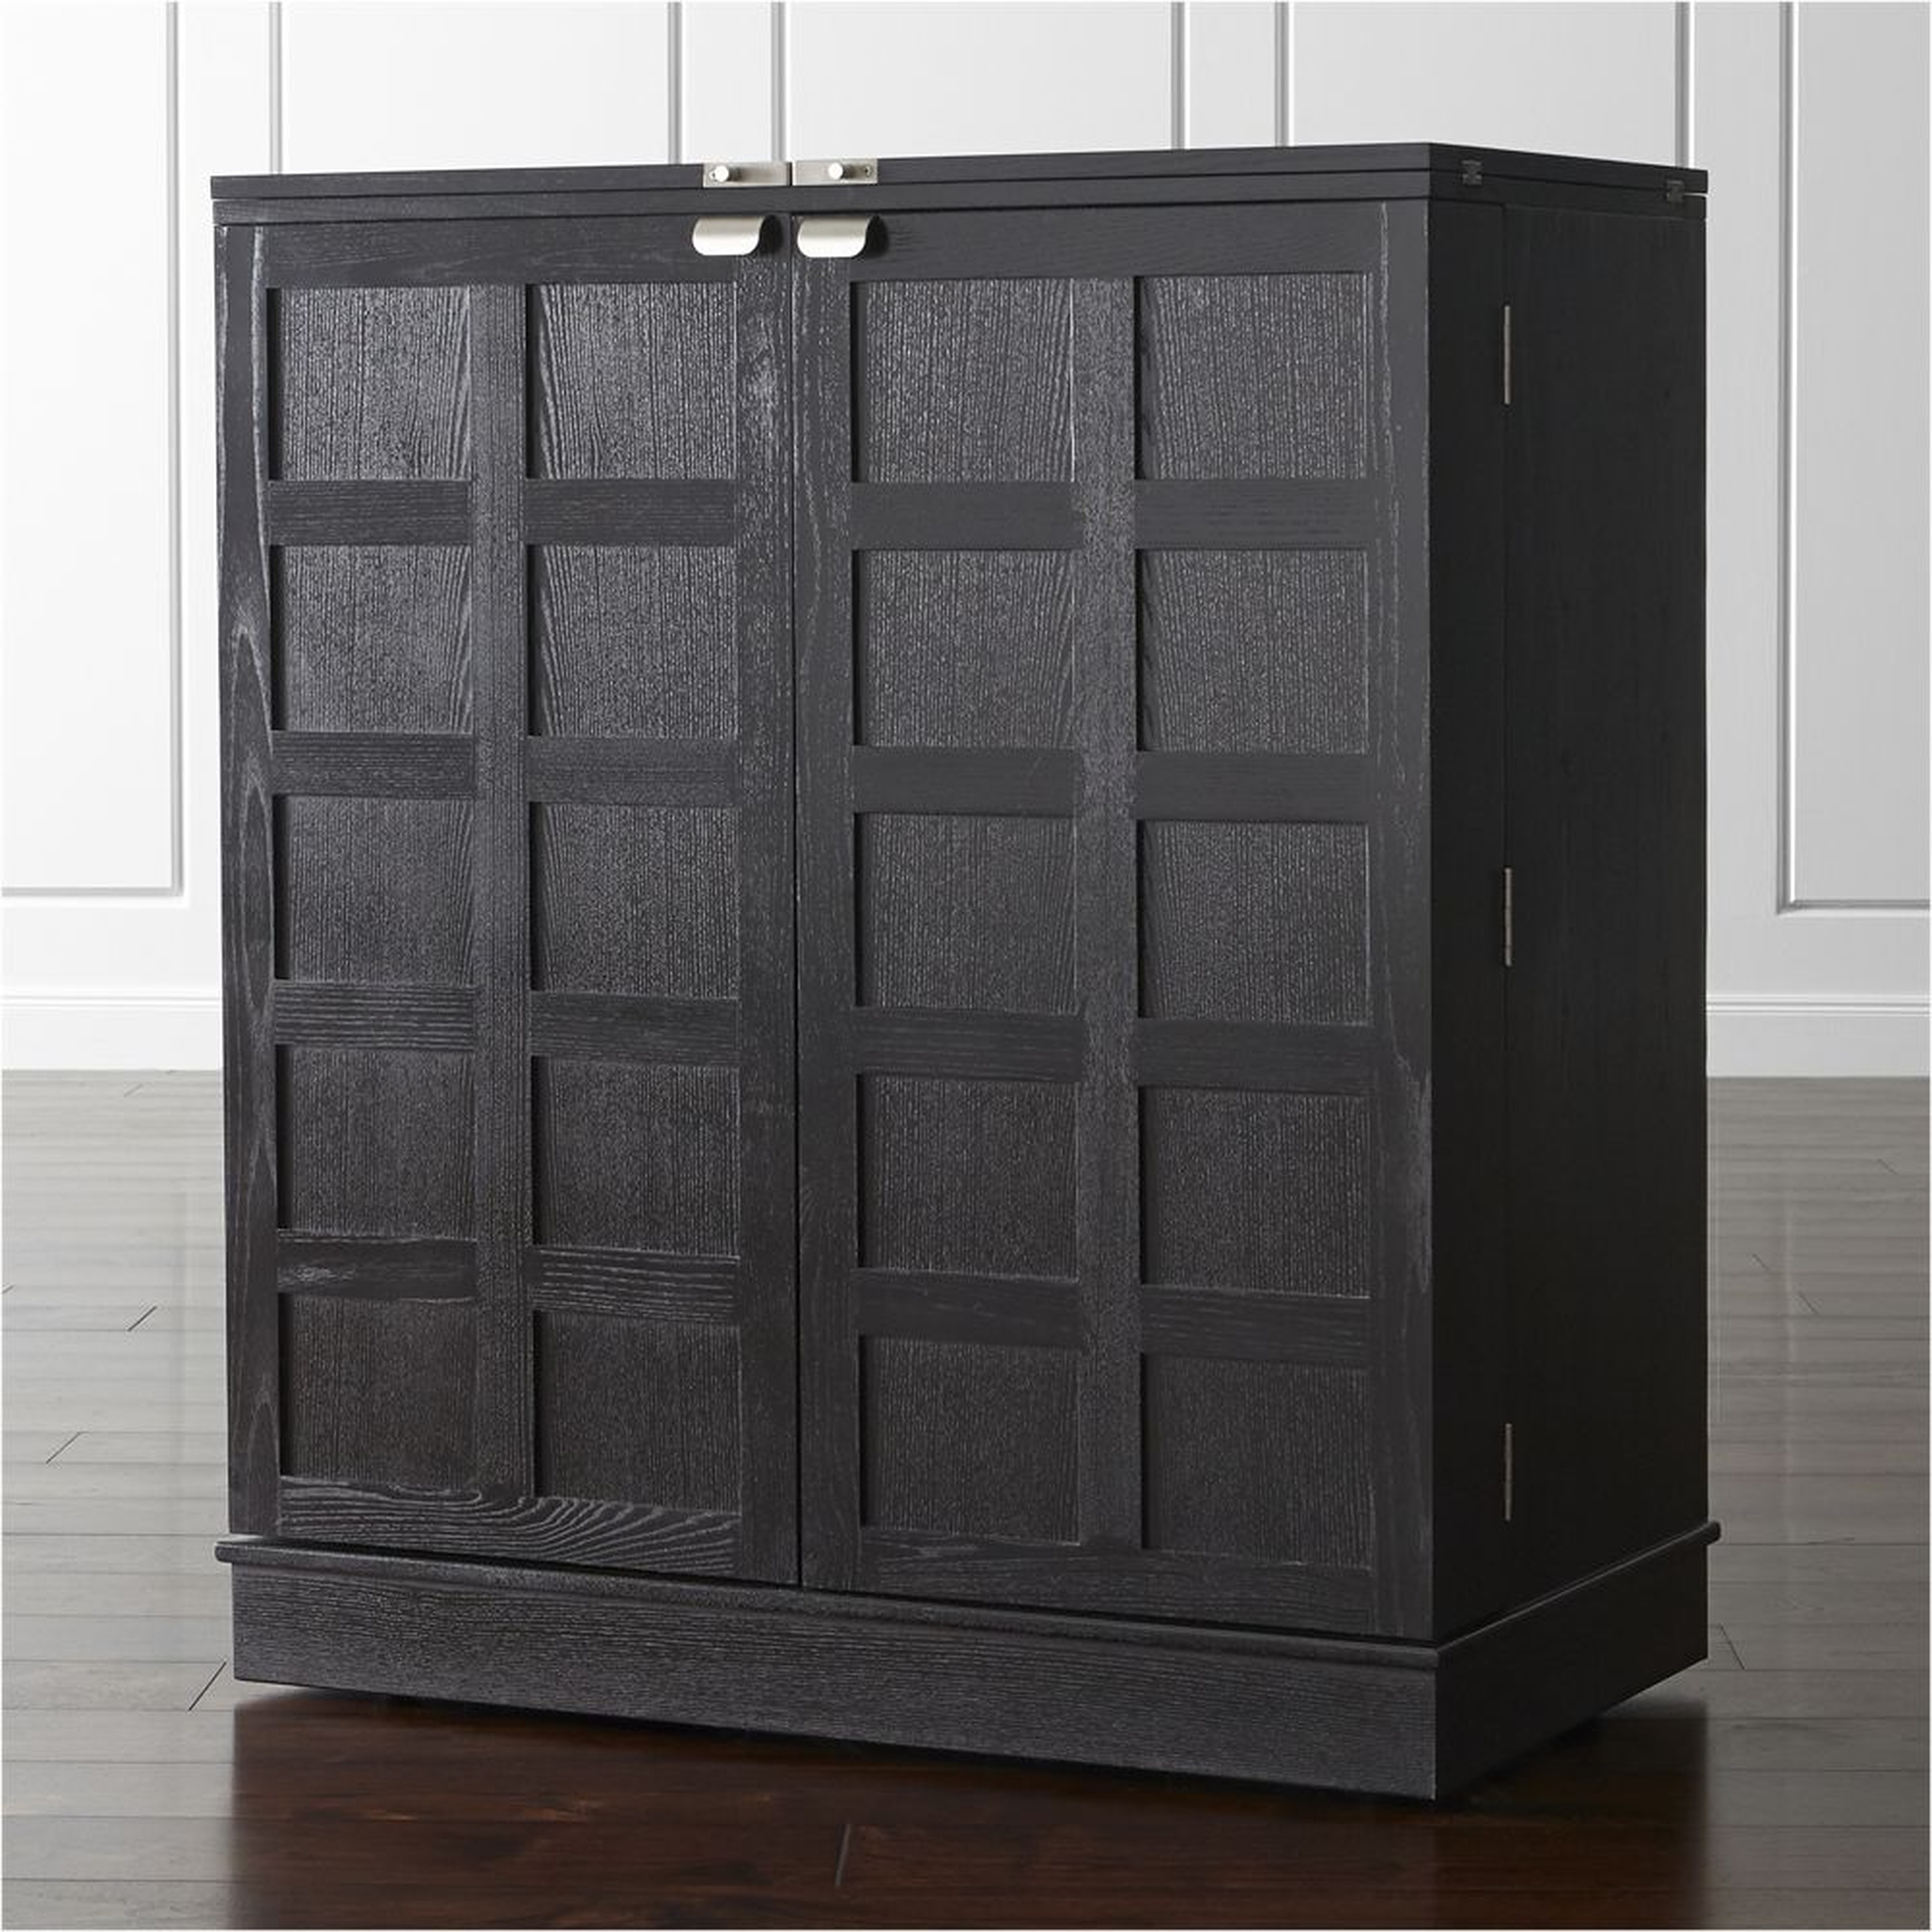 Steamer Bar Cabinet - Crate and Barrel